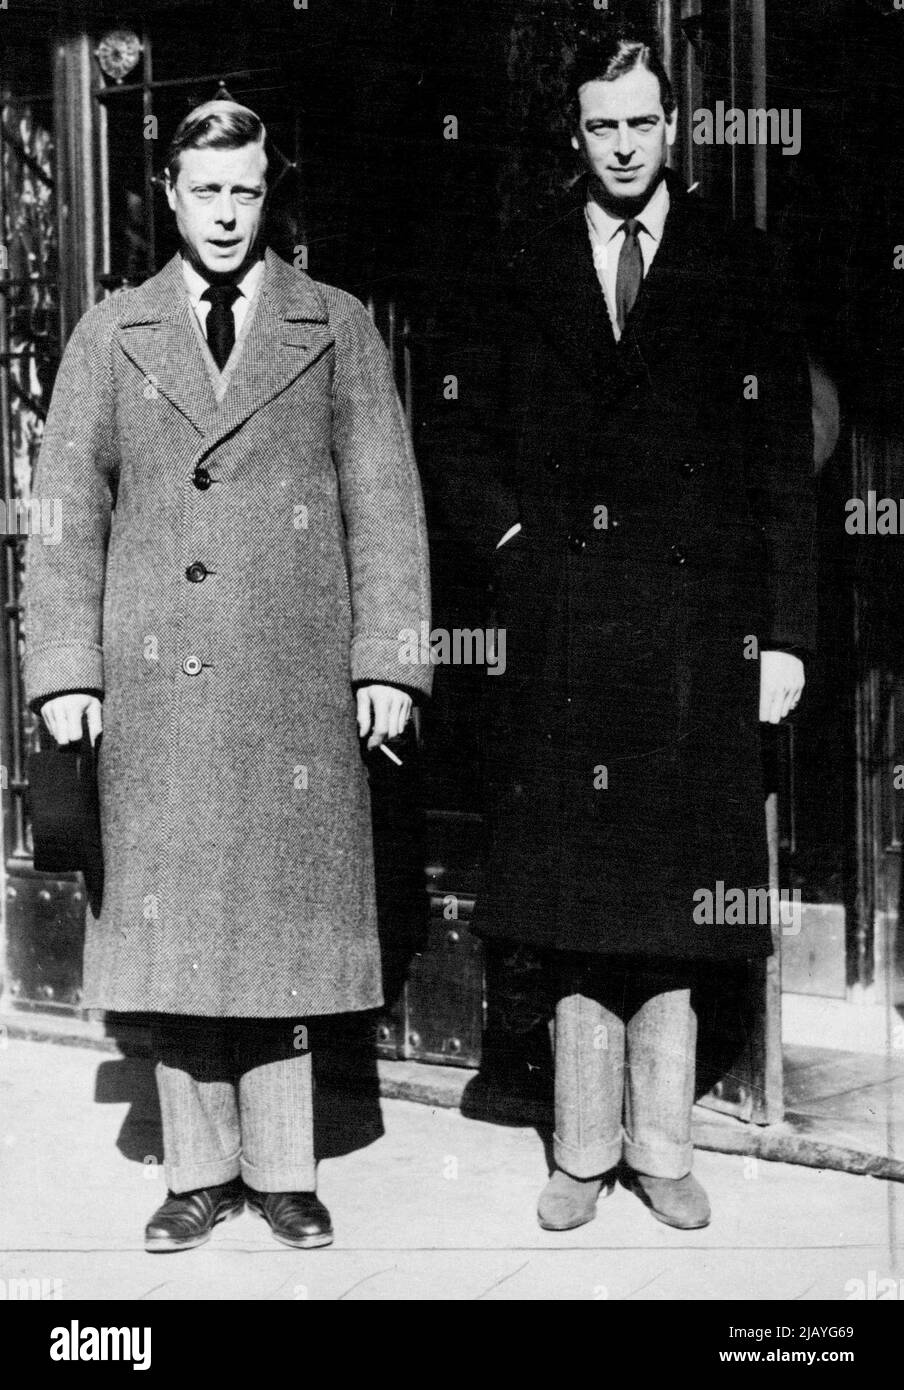 Duke of Windsor and Duke of Kent Meet in Vienna: The Duke of Windsor (left) and the Duke of Kent photographed outside the Hotel Bristol when they left the hotel after their talk. The Duke of Windsor met the Duke of Kent on Wednesday in Vienna, for the first time since the former's departure from England on Dec. 12th. The Duke of Kent arrived in Vienna from Munich where the Duchess of Kent is staying. The Duke of Windsor arrived from Carinthia. The two Royal brothers met in the private suite of the Hotel Bristol which is always used by the Duke of Windsor when he is visiting Vienna. February 26 Stock Photo